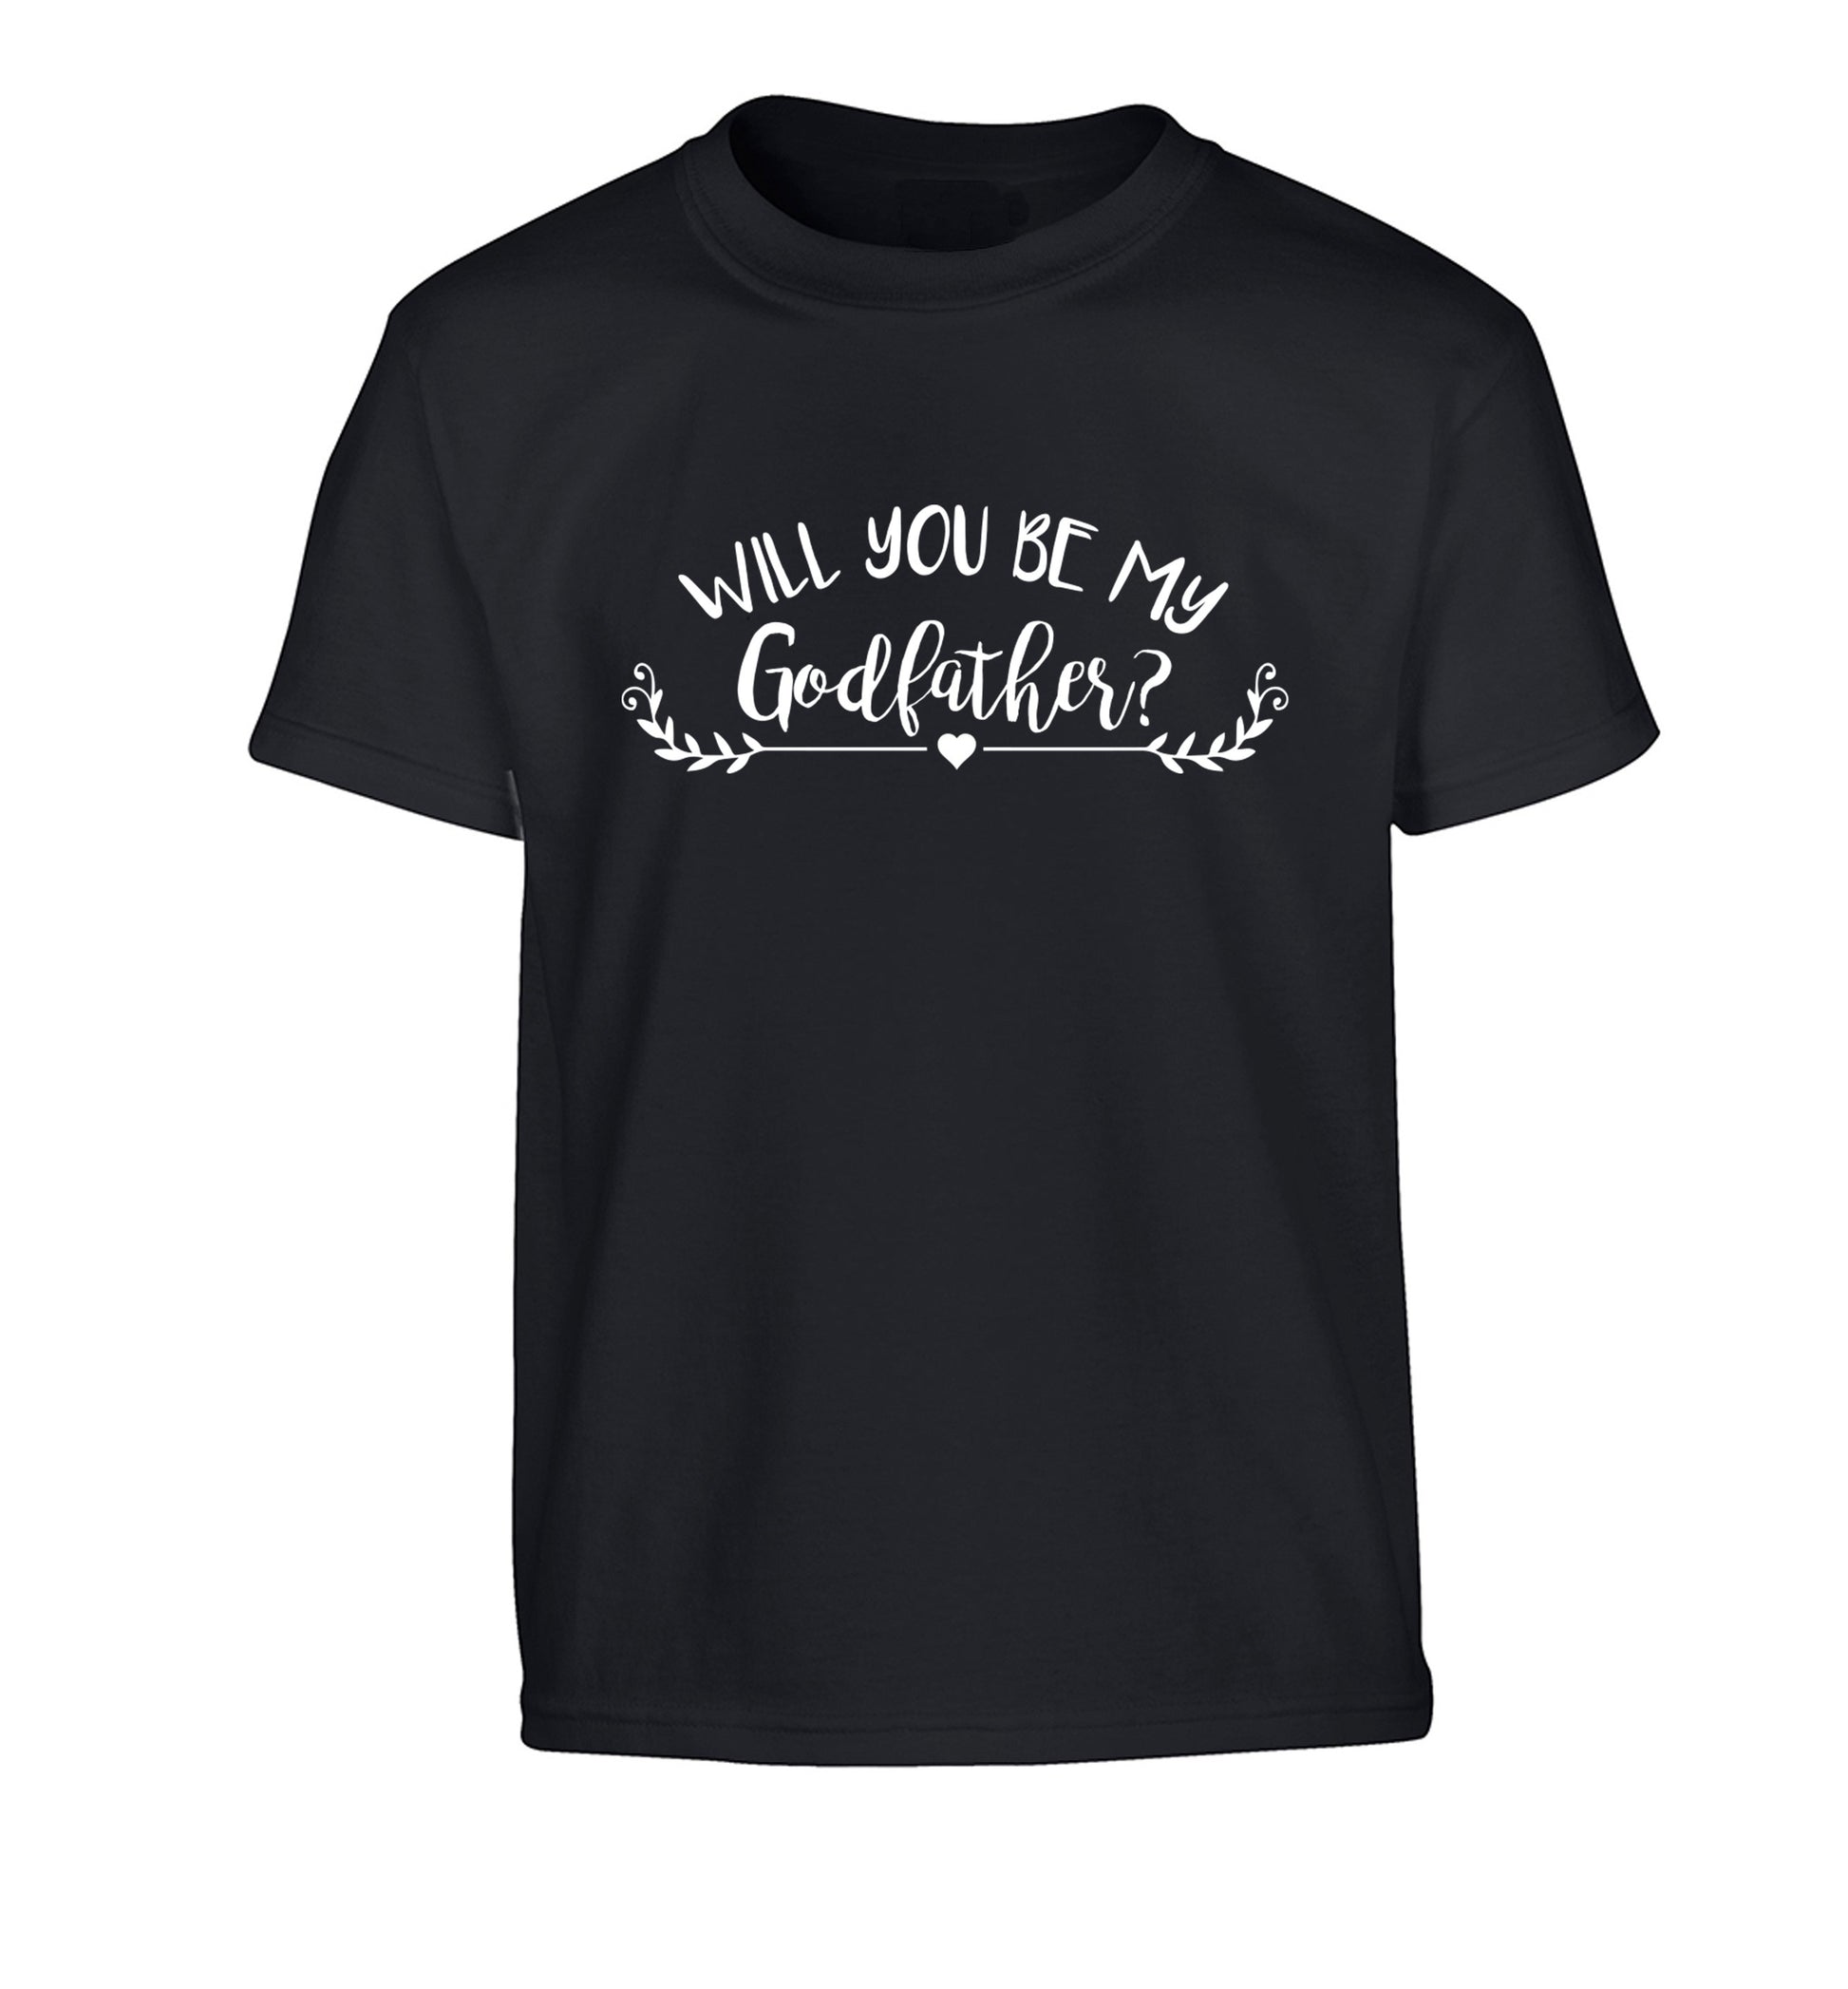 Will you be my godfather? Children's black Tshirt 12-14 Years